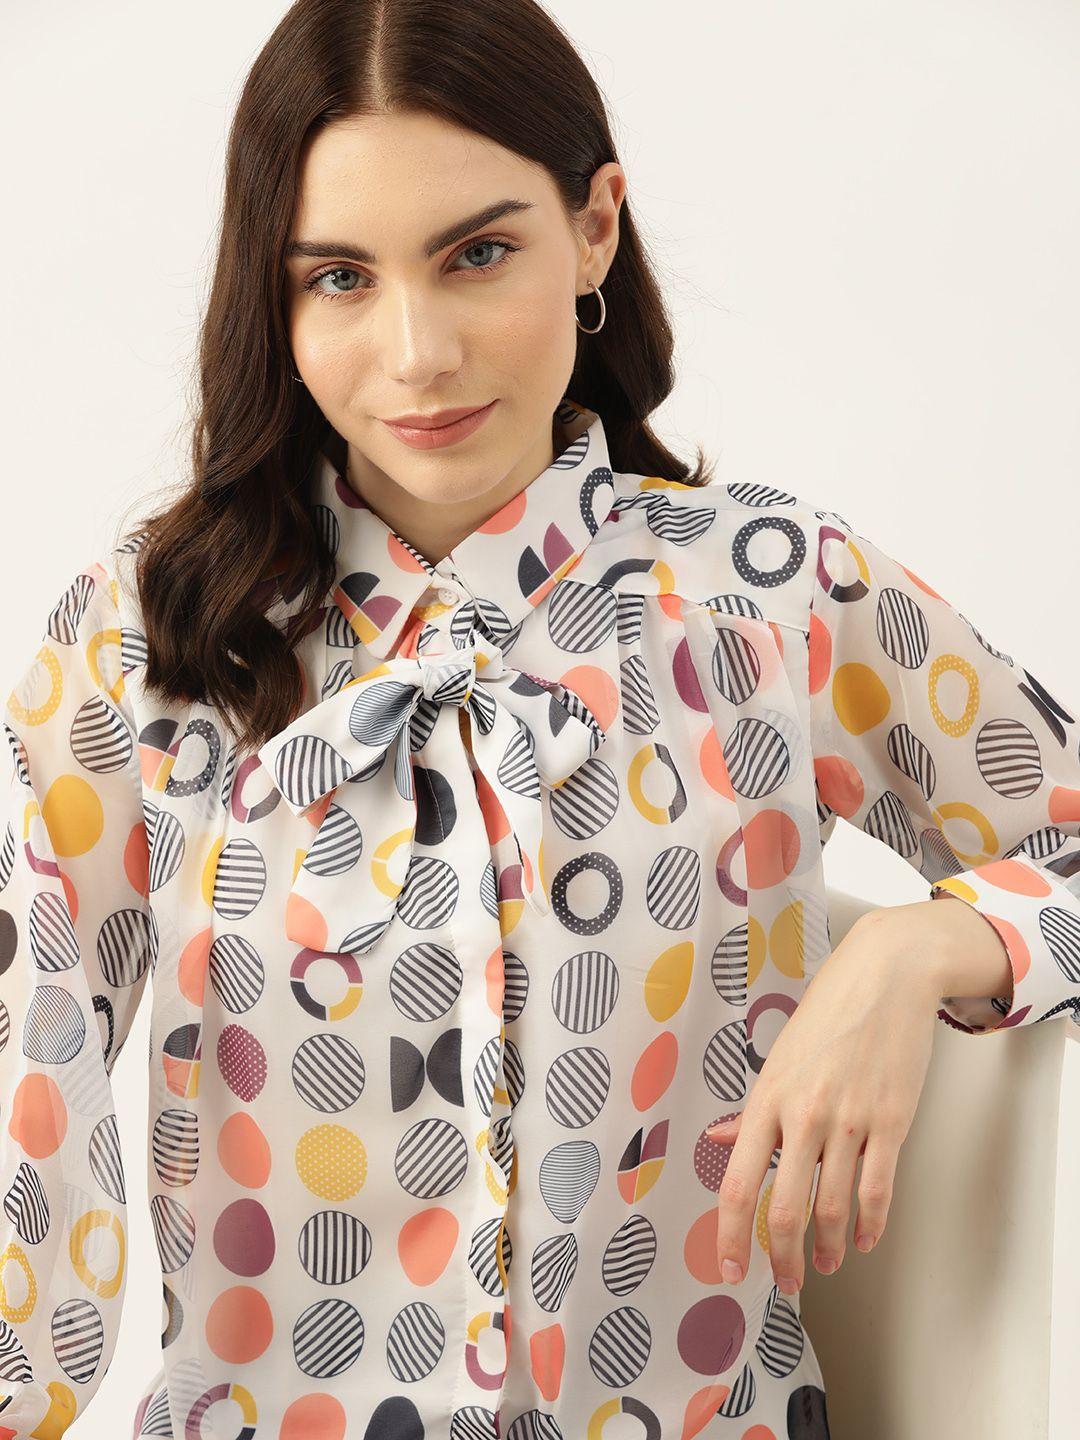 dressberry geometric printed georgette shirt style top